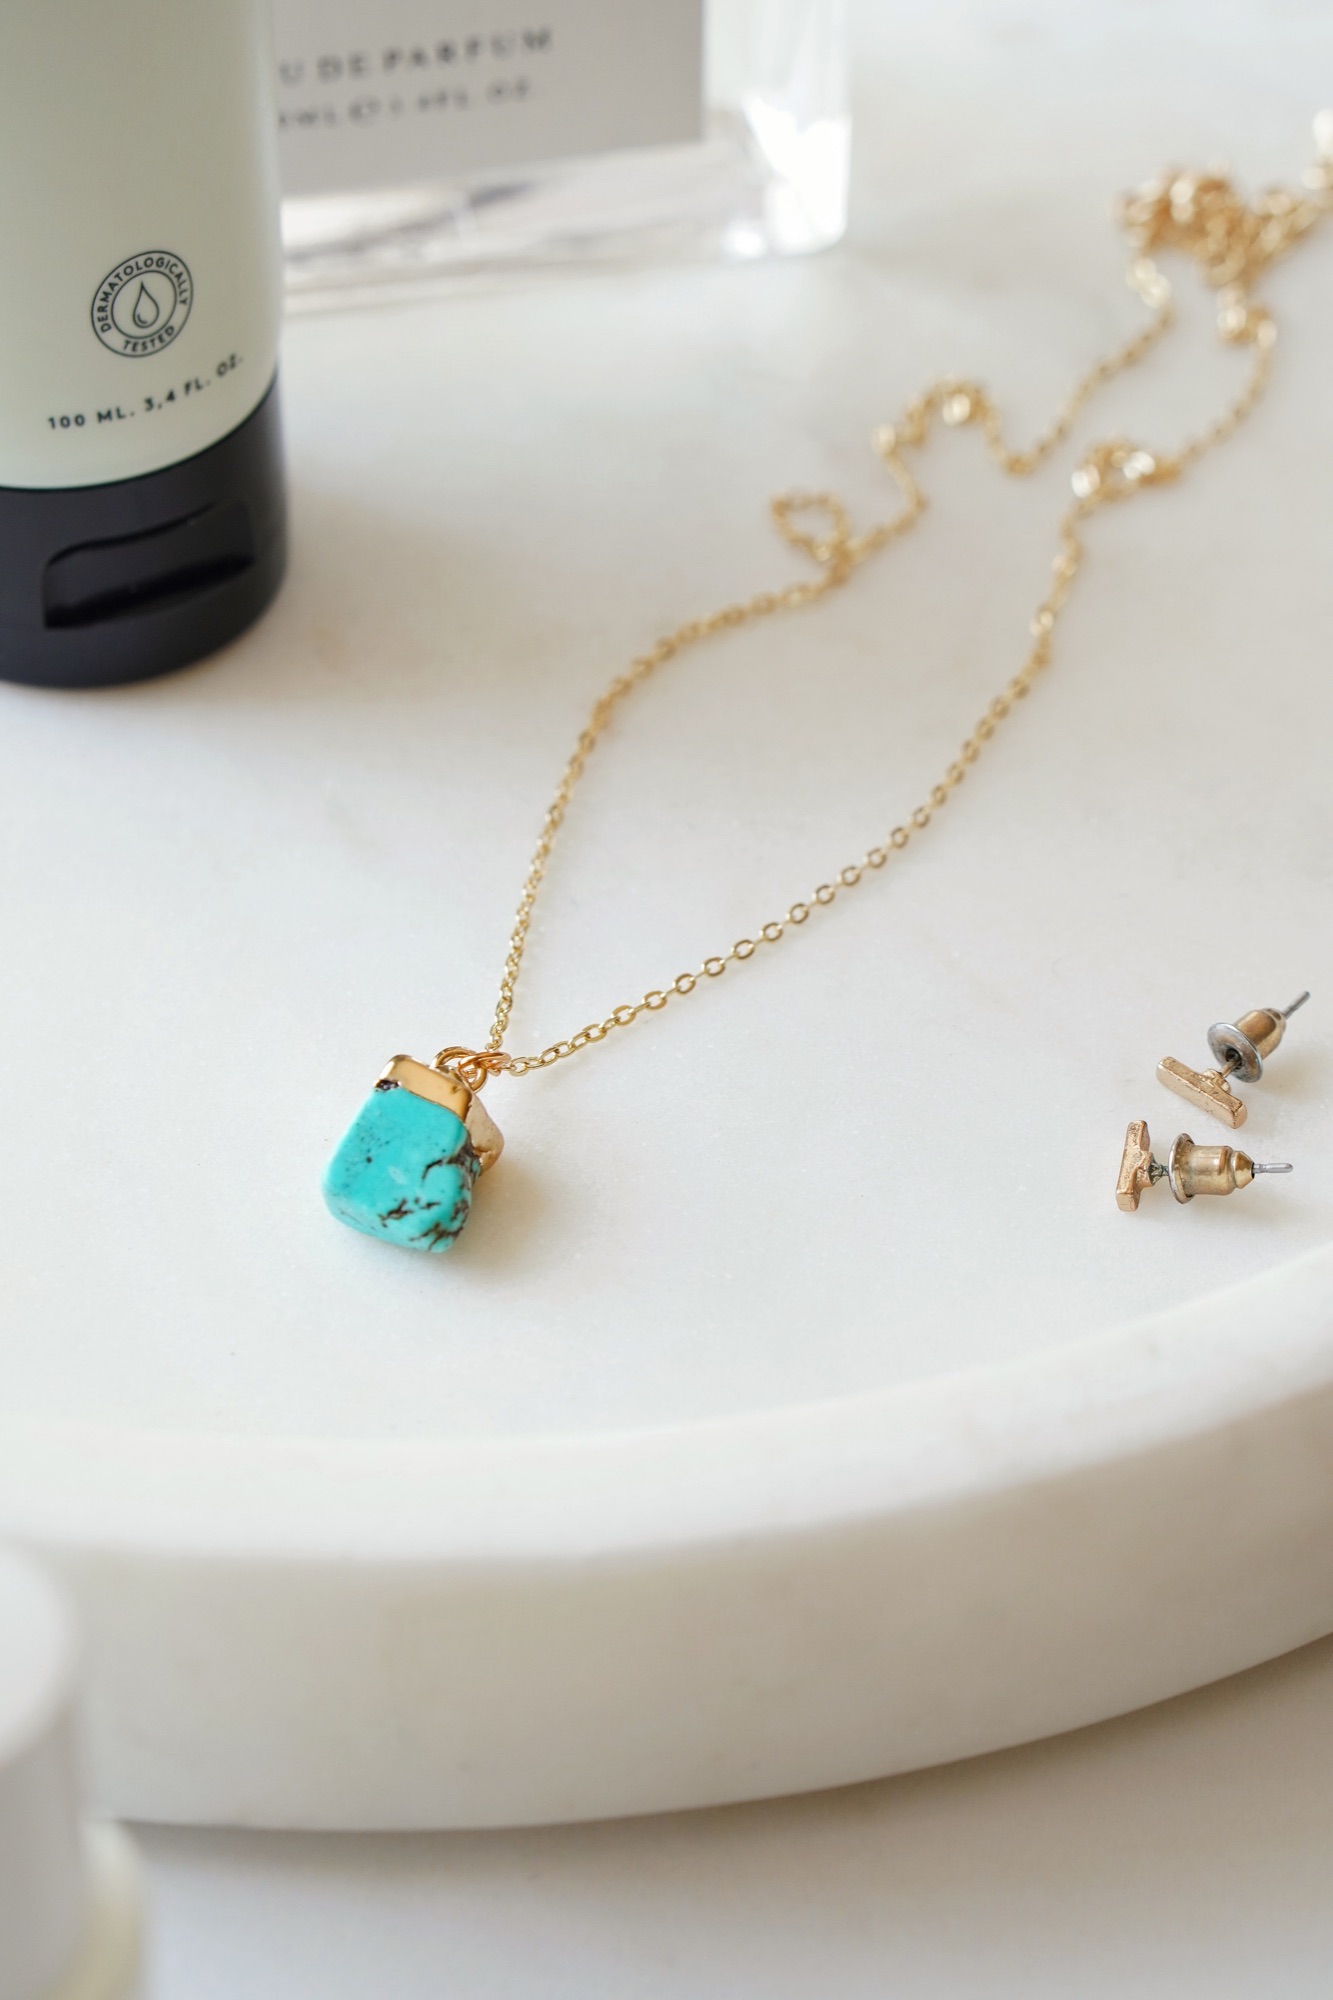 Turquoise Necklace by Xander Kostroma